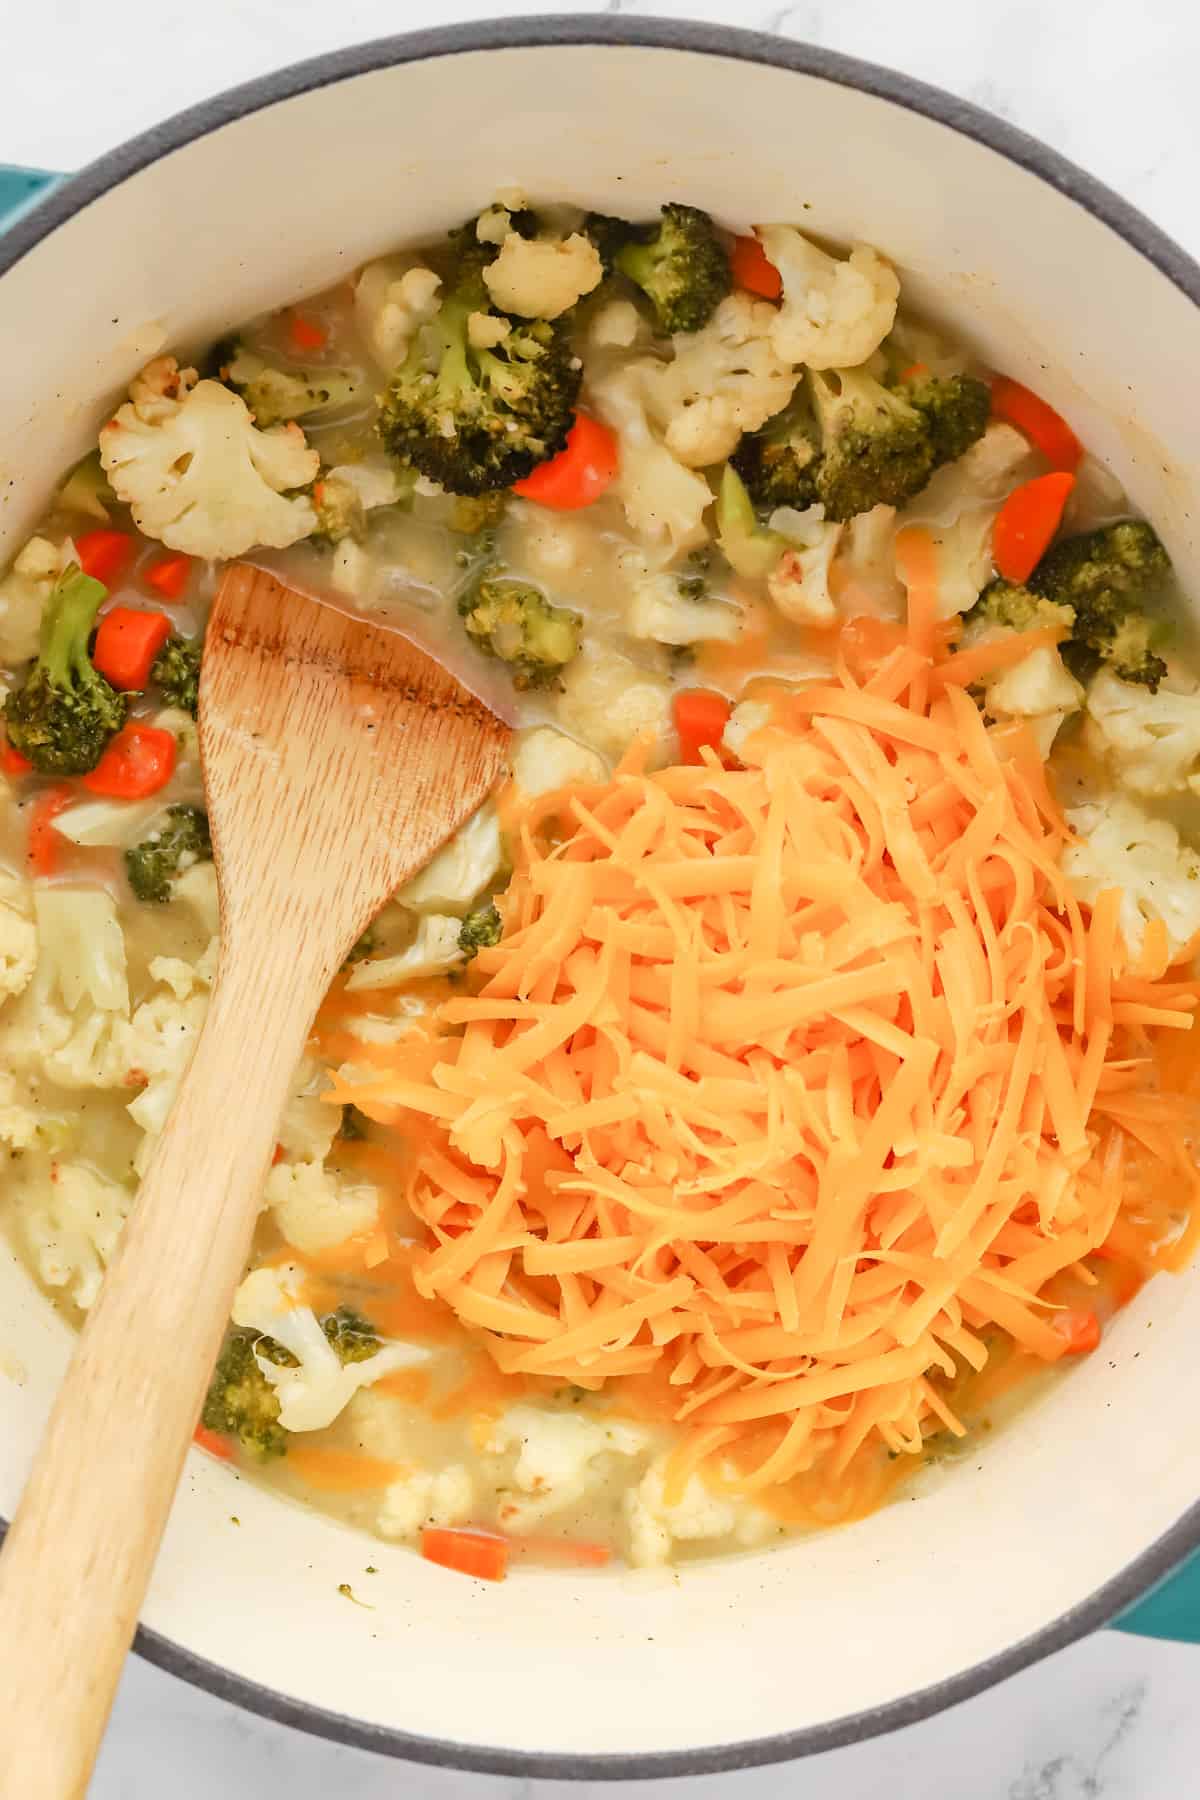 Shredded cheddar cheese in pot with vegetables and soup base. 